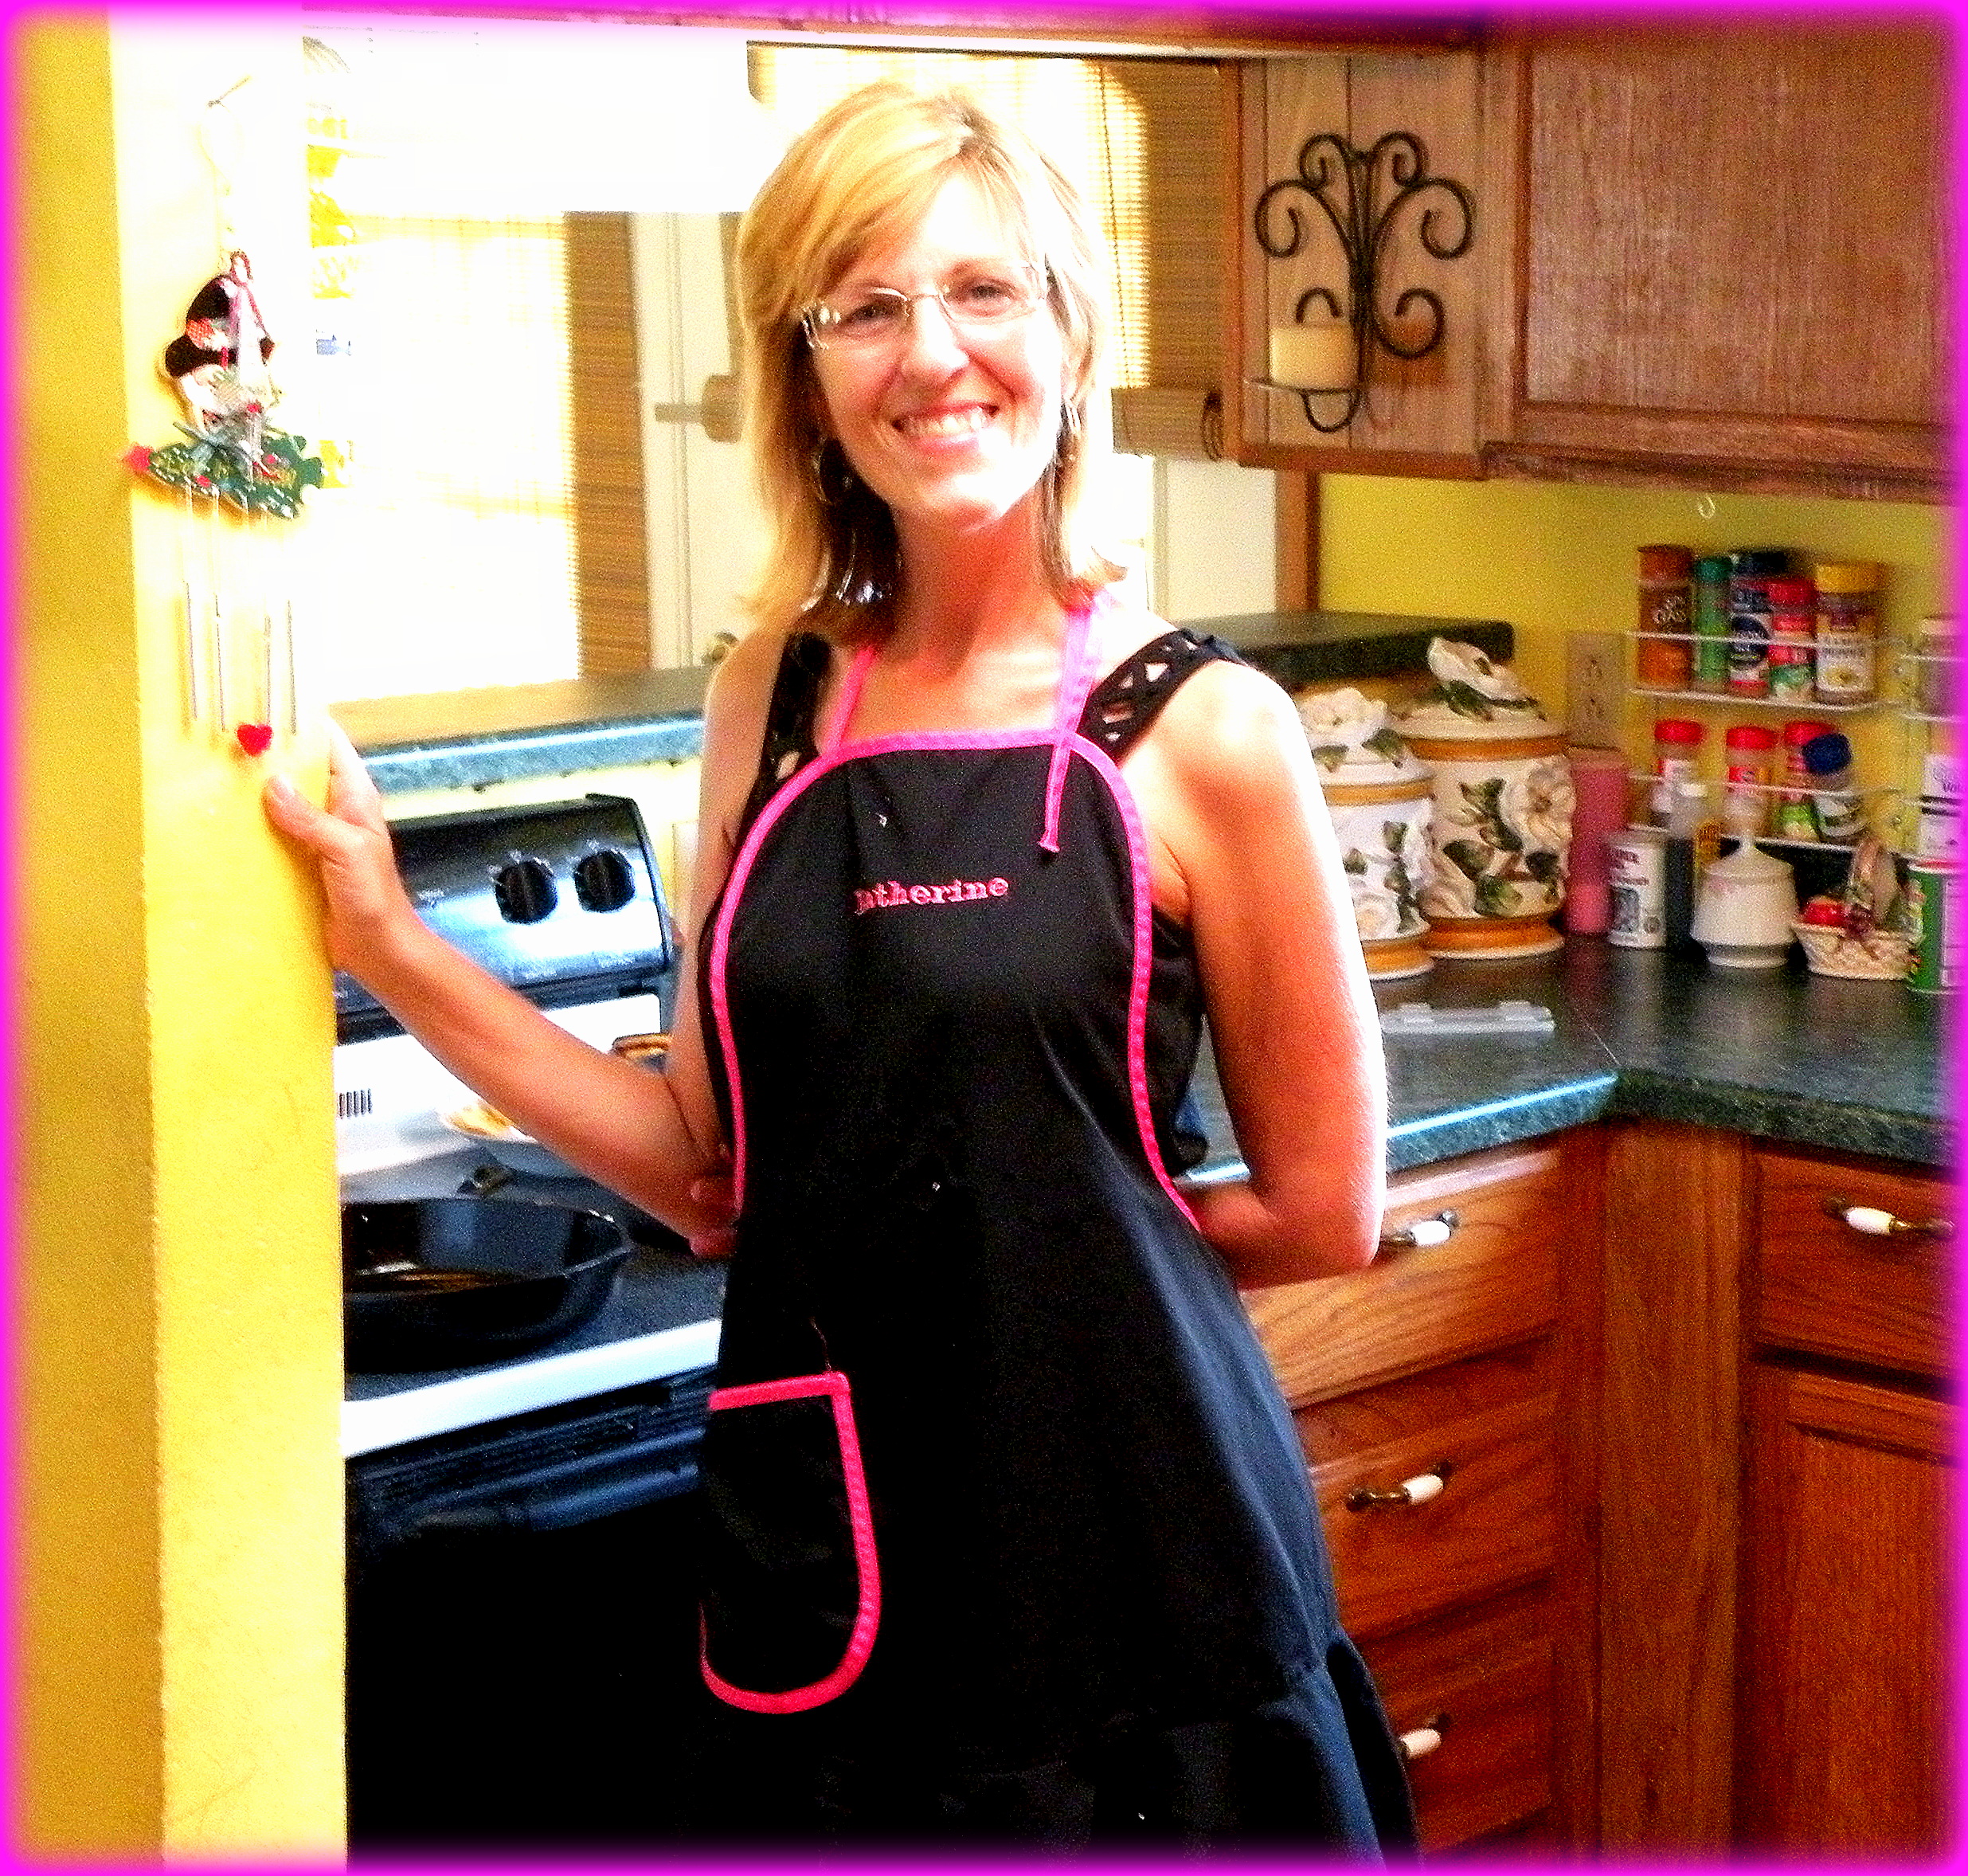 here’s me not only taking over her kitchen but taking over her kitchen AND ...